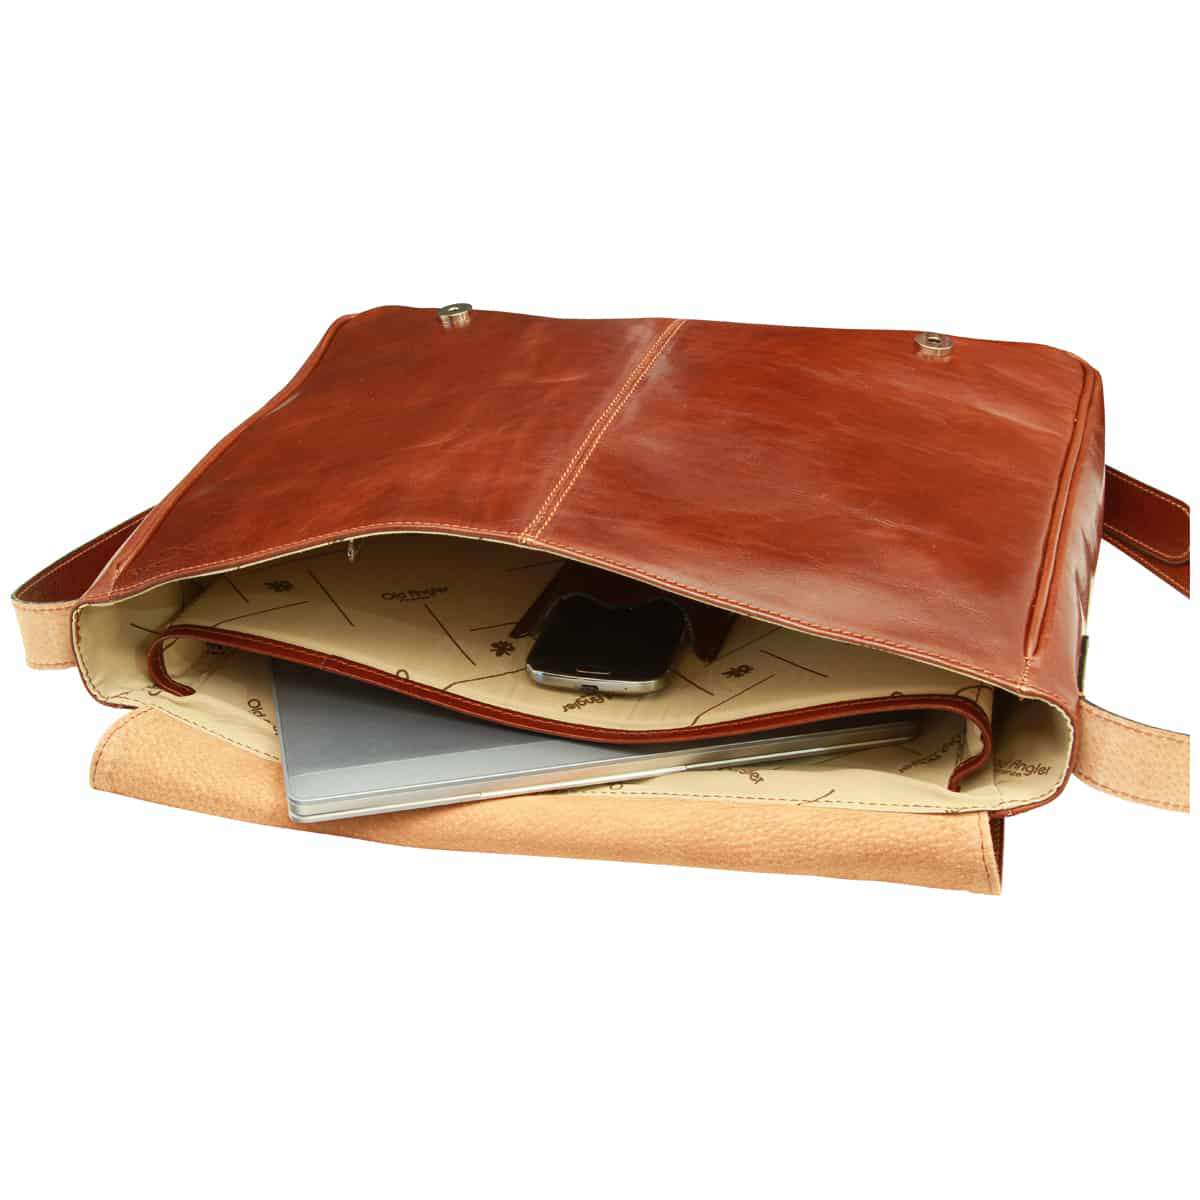 Cowhide Leather Messenger Bag - Brown | 213105MA | EURO | Old Angler Firenze